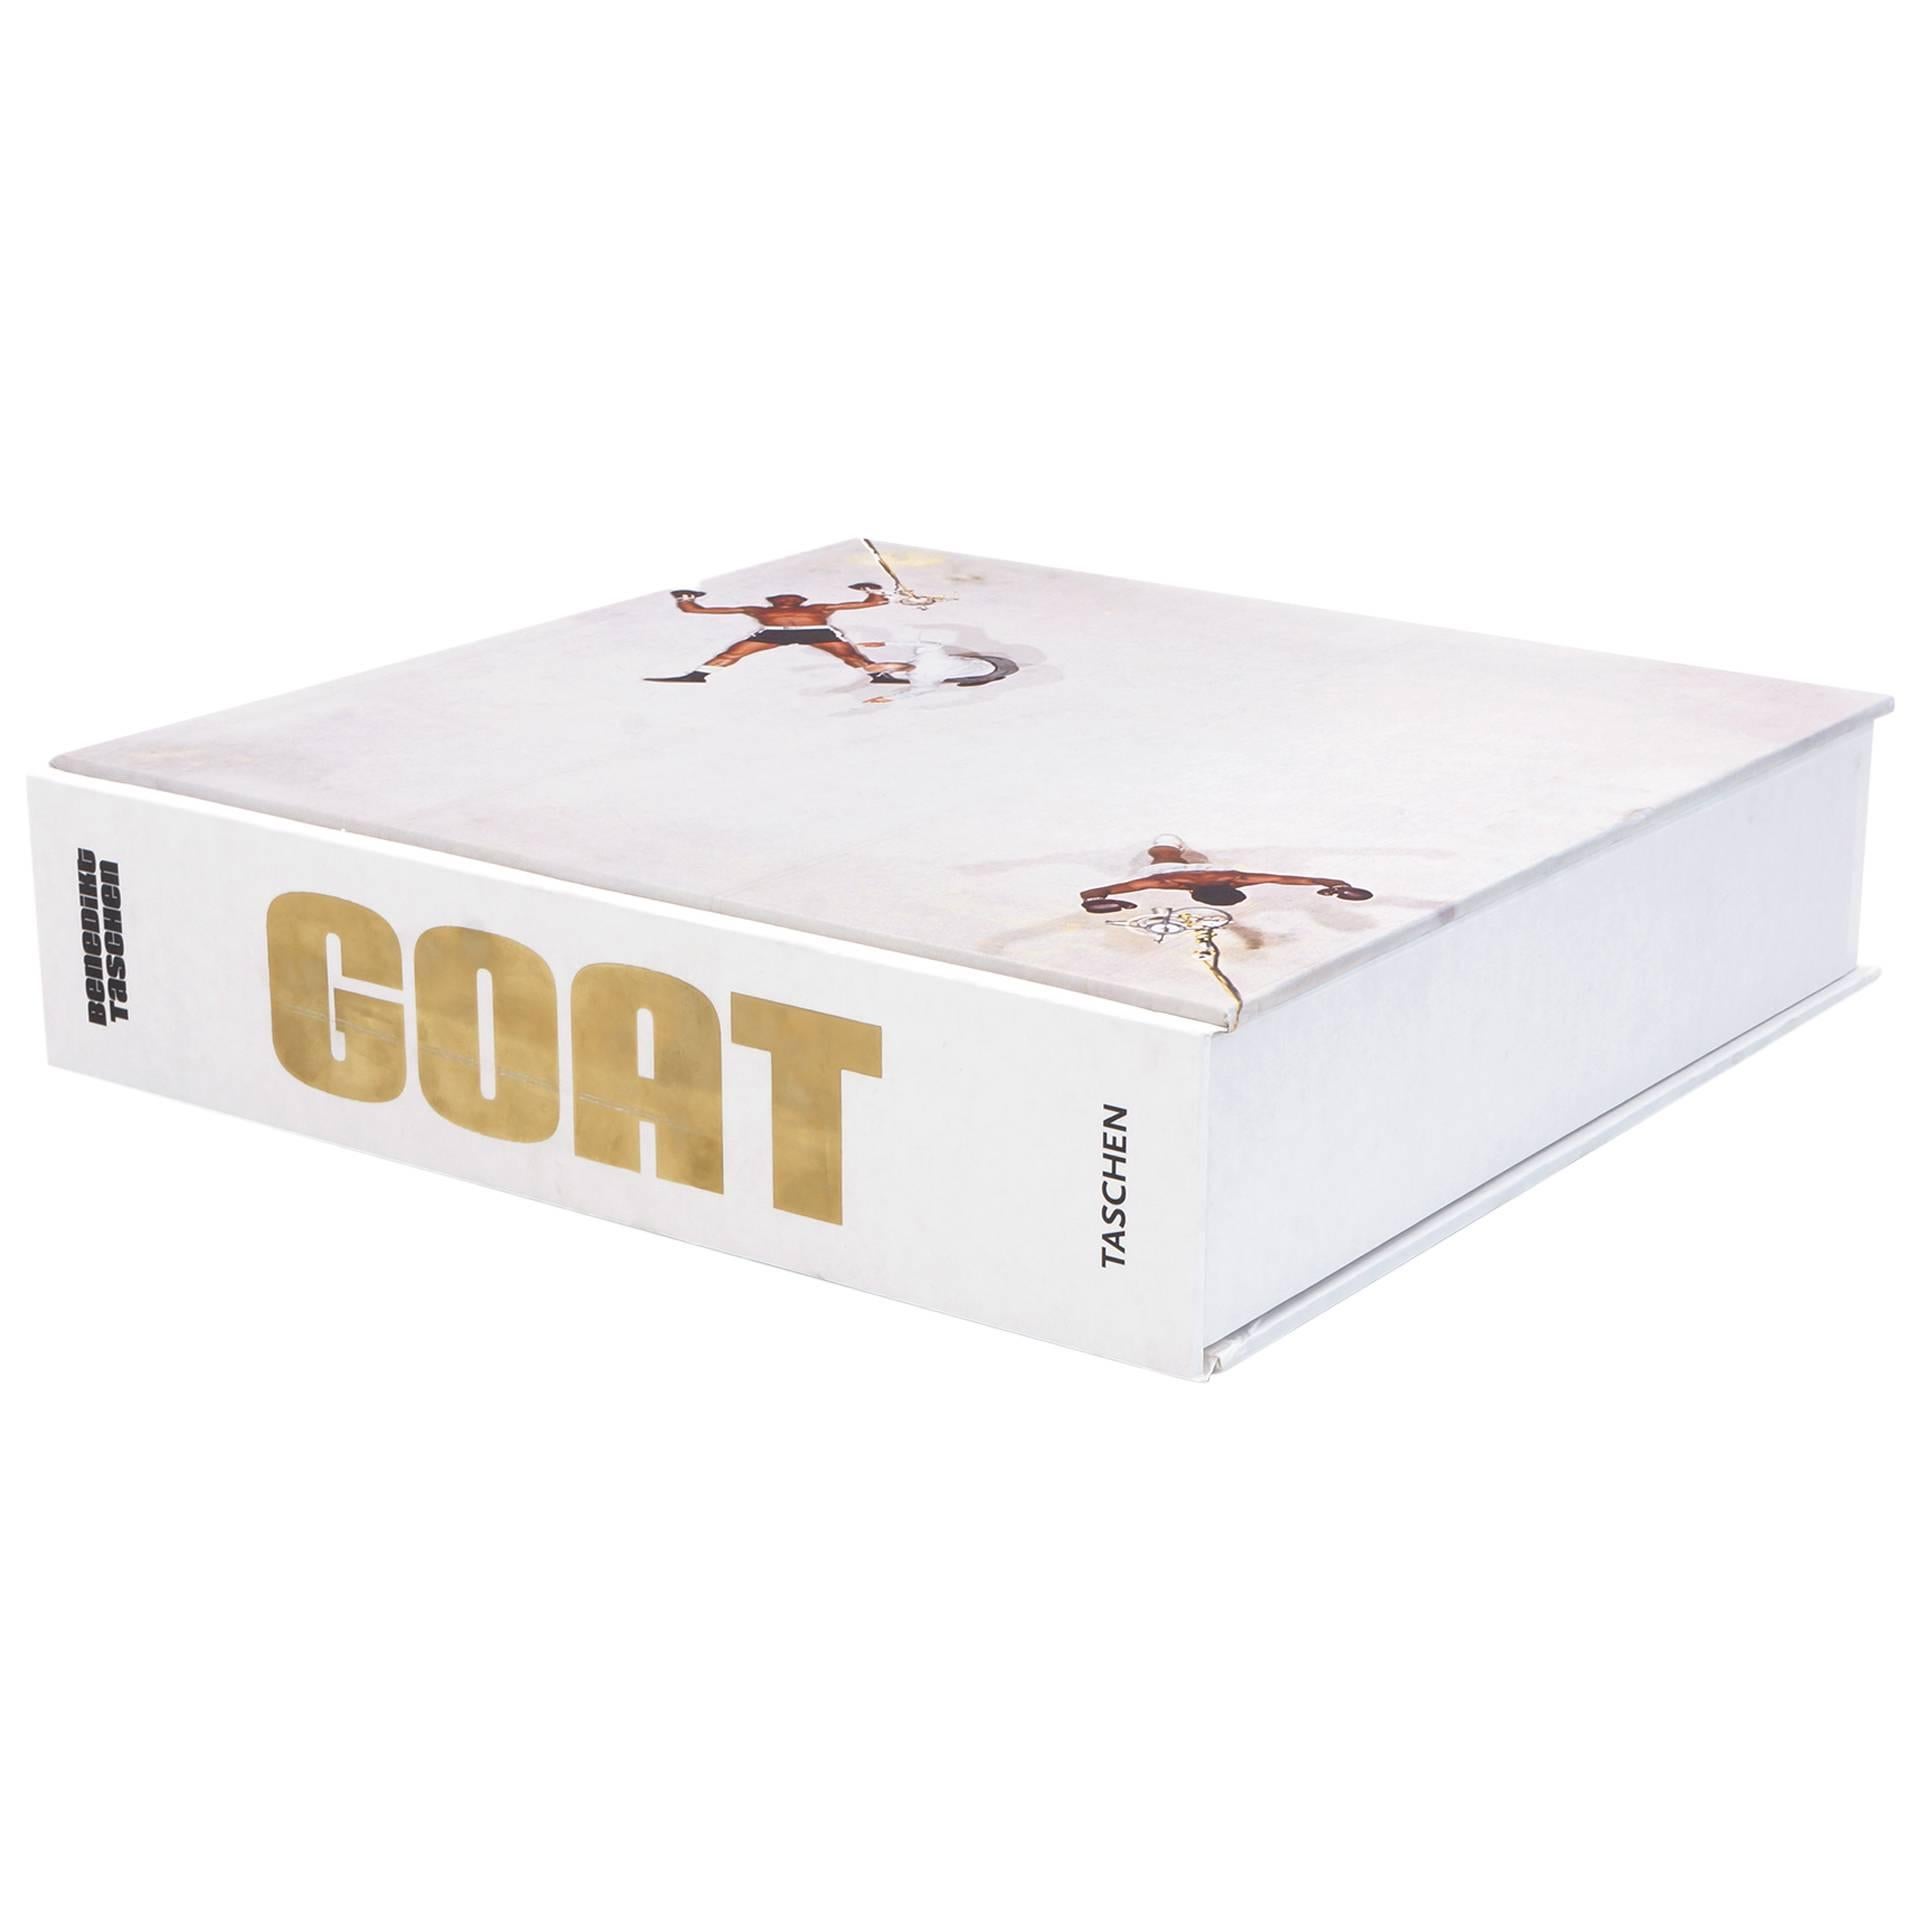 GOAT - Tribute to Mohammad Ali. Art by Jeff Koons. Published by Taschen at  1stDibs